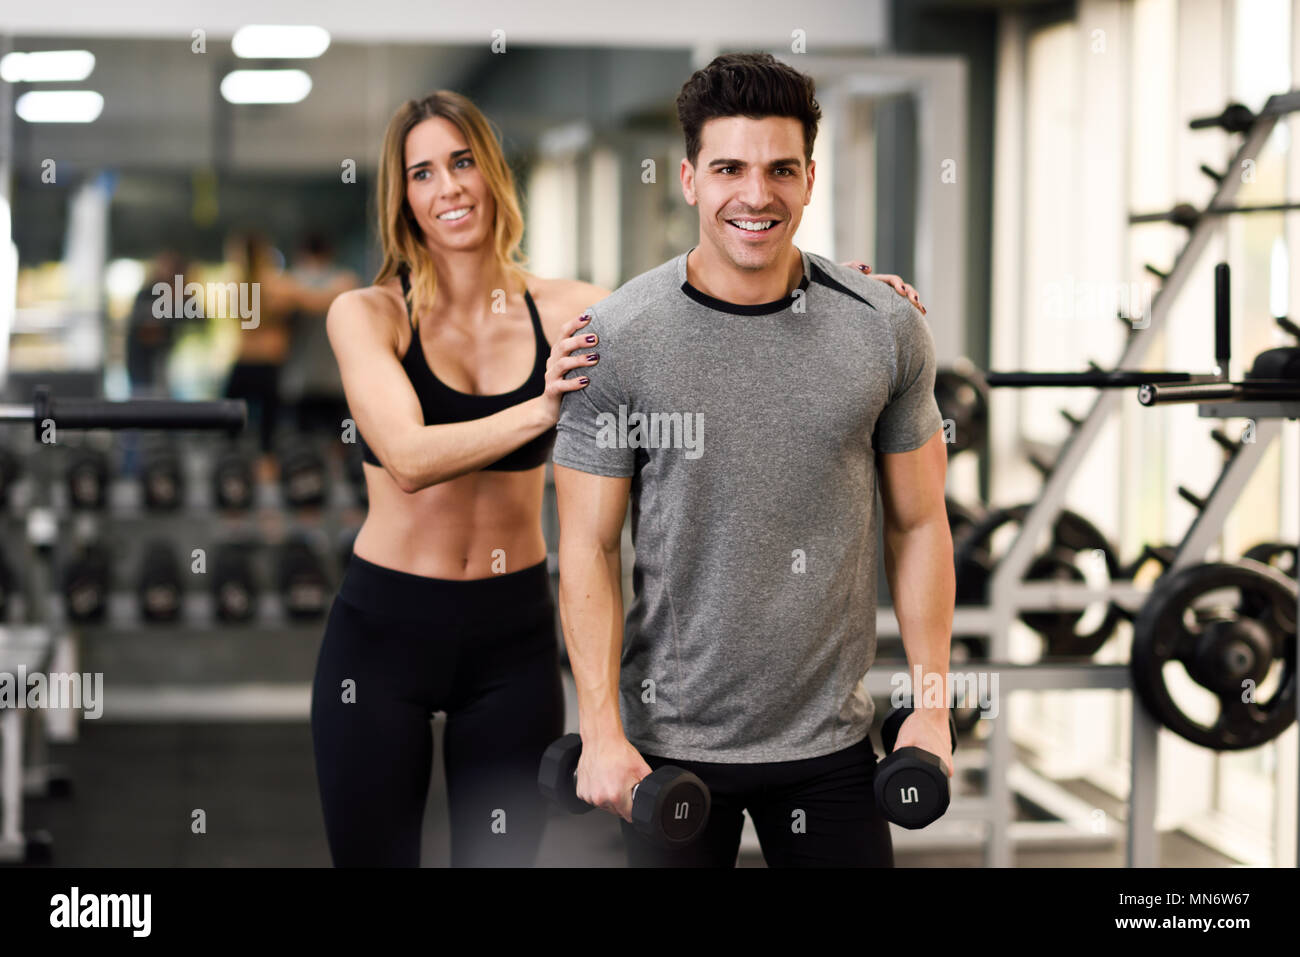 Female personal trainer helping a young man lift dumbells while